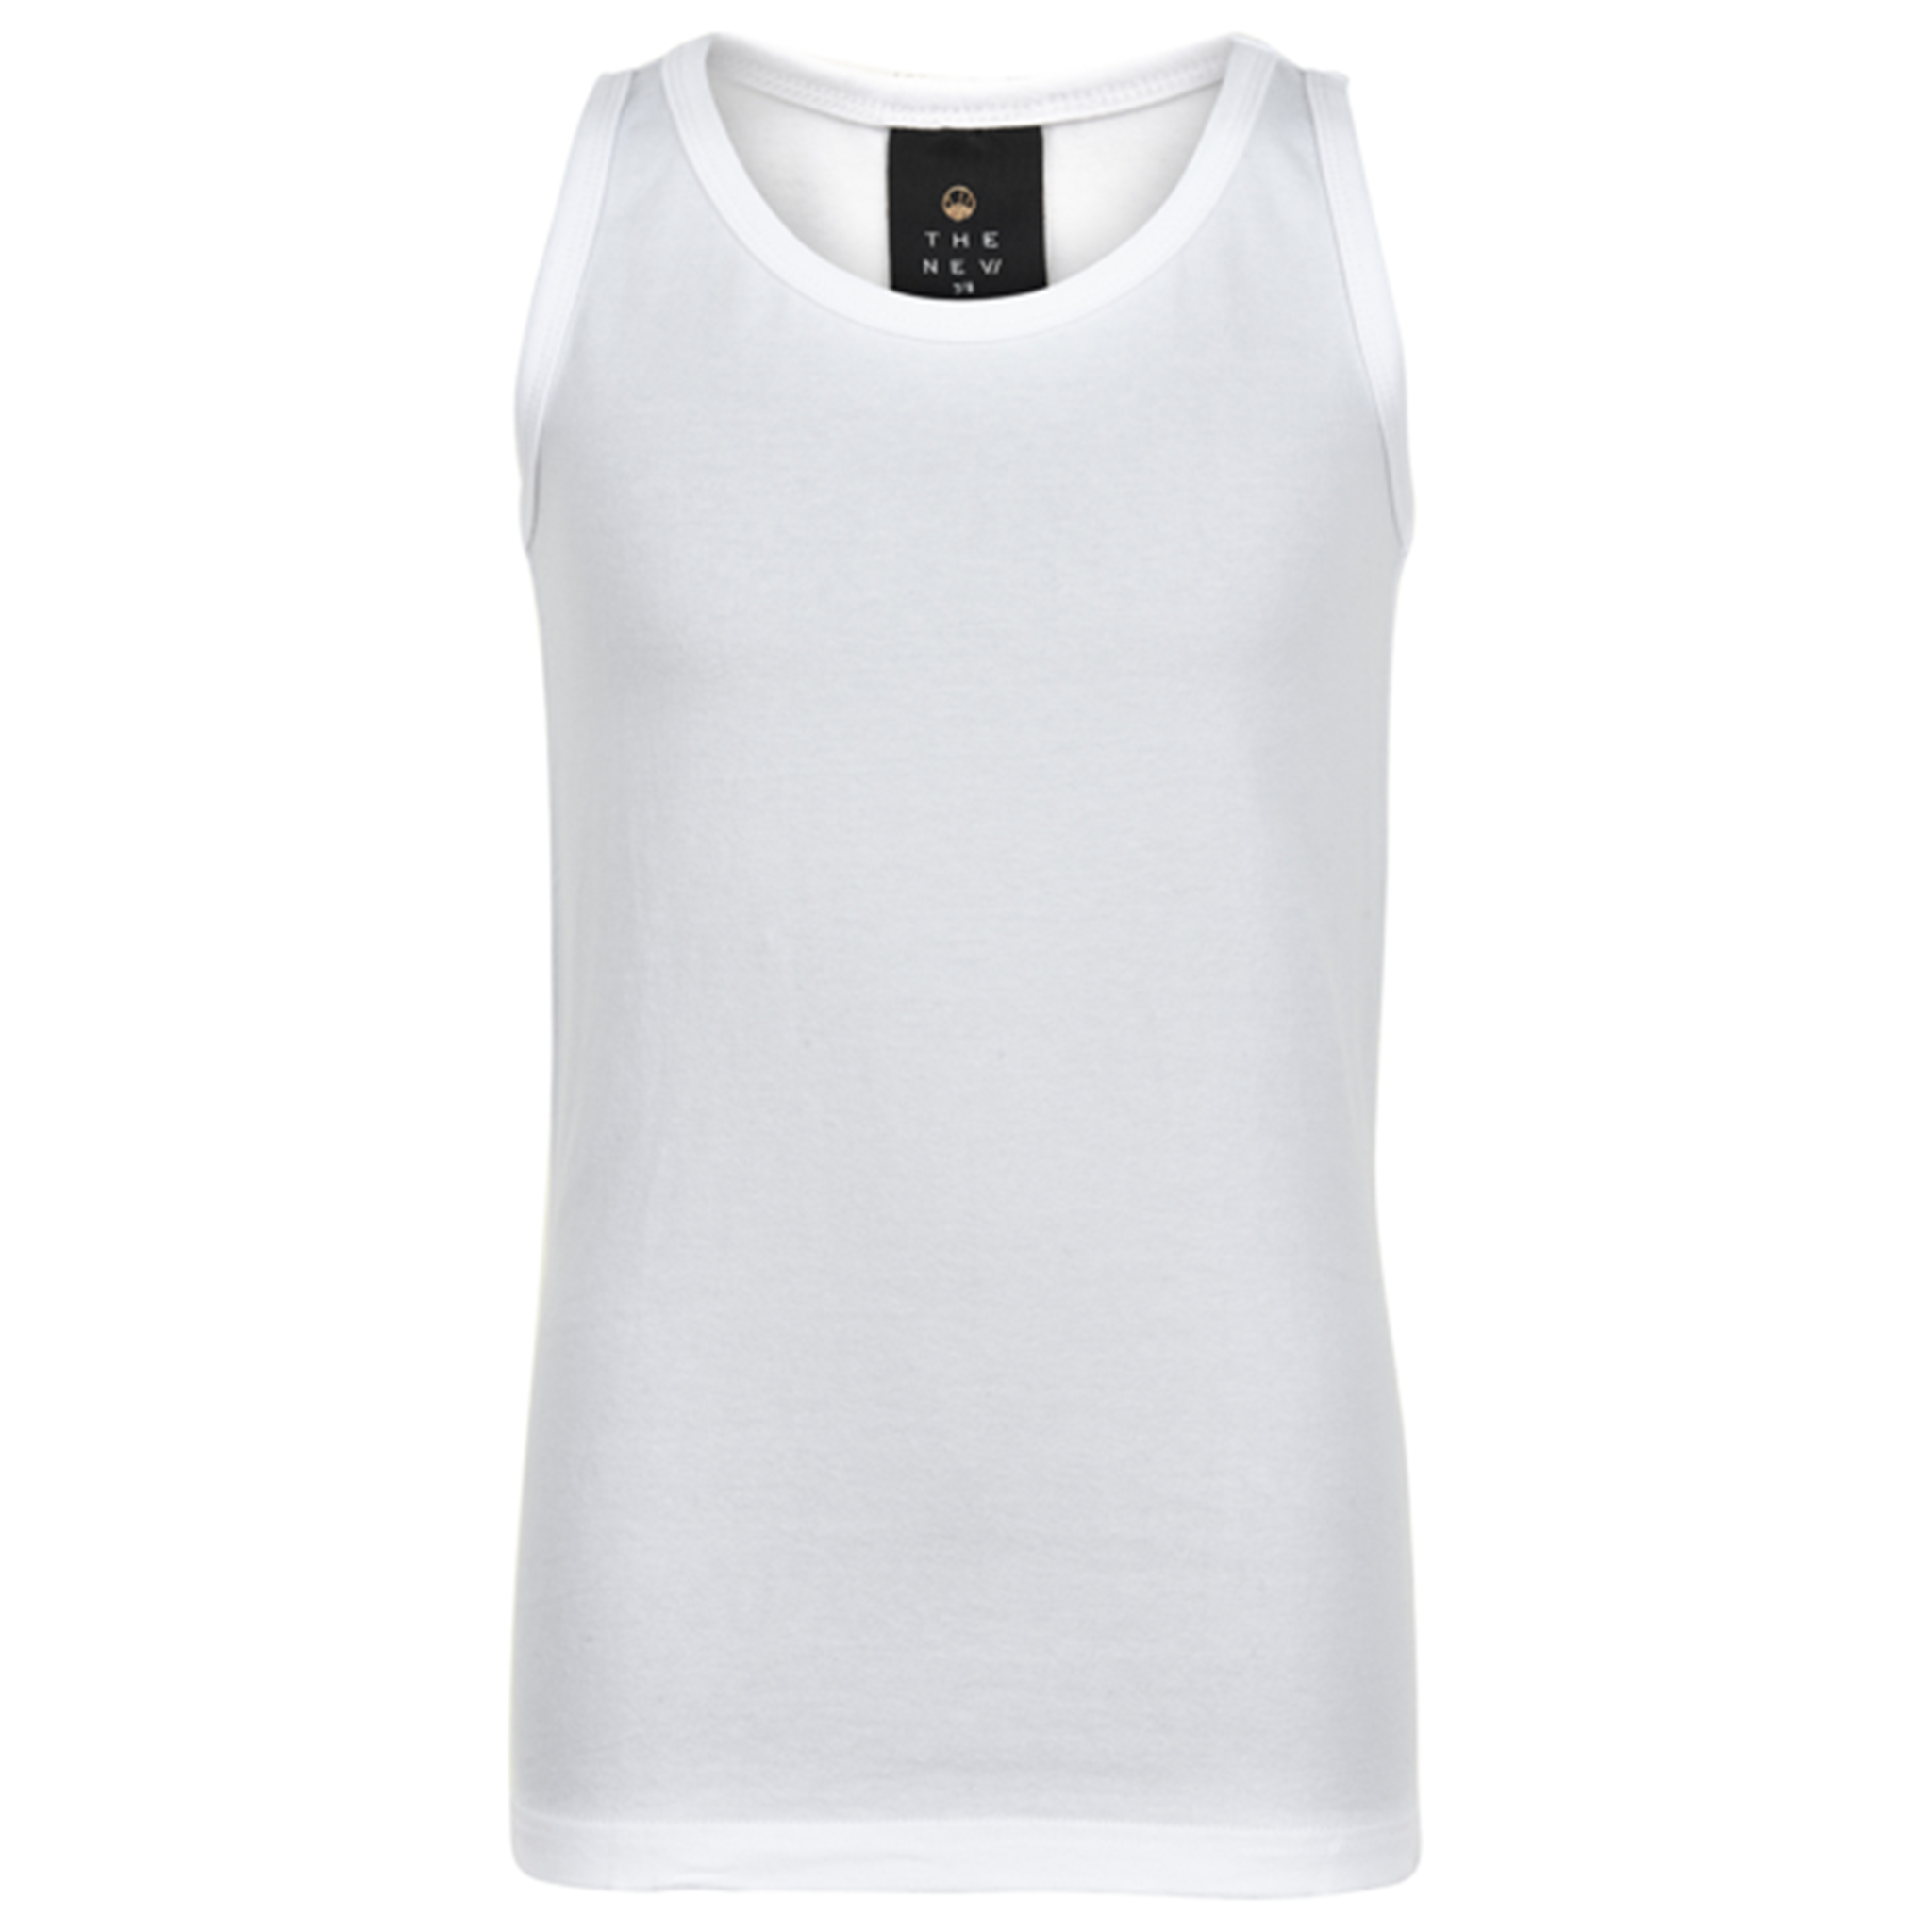 The New Classic Tank Top Boy White